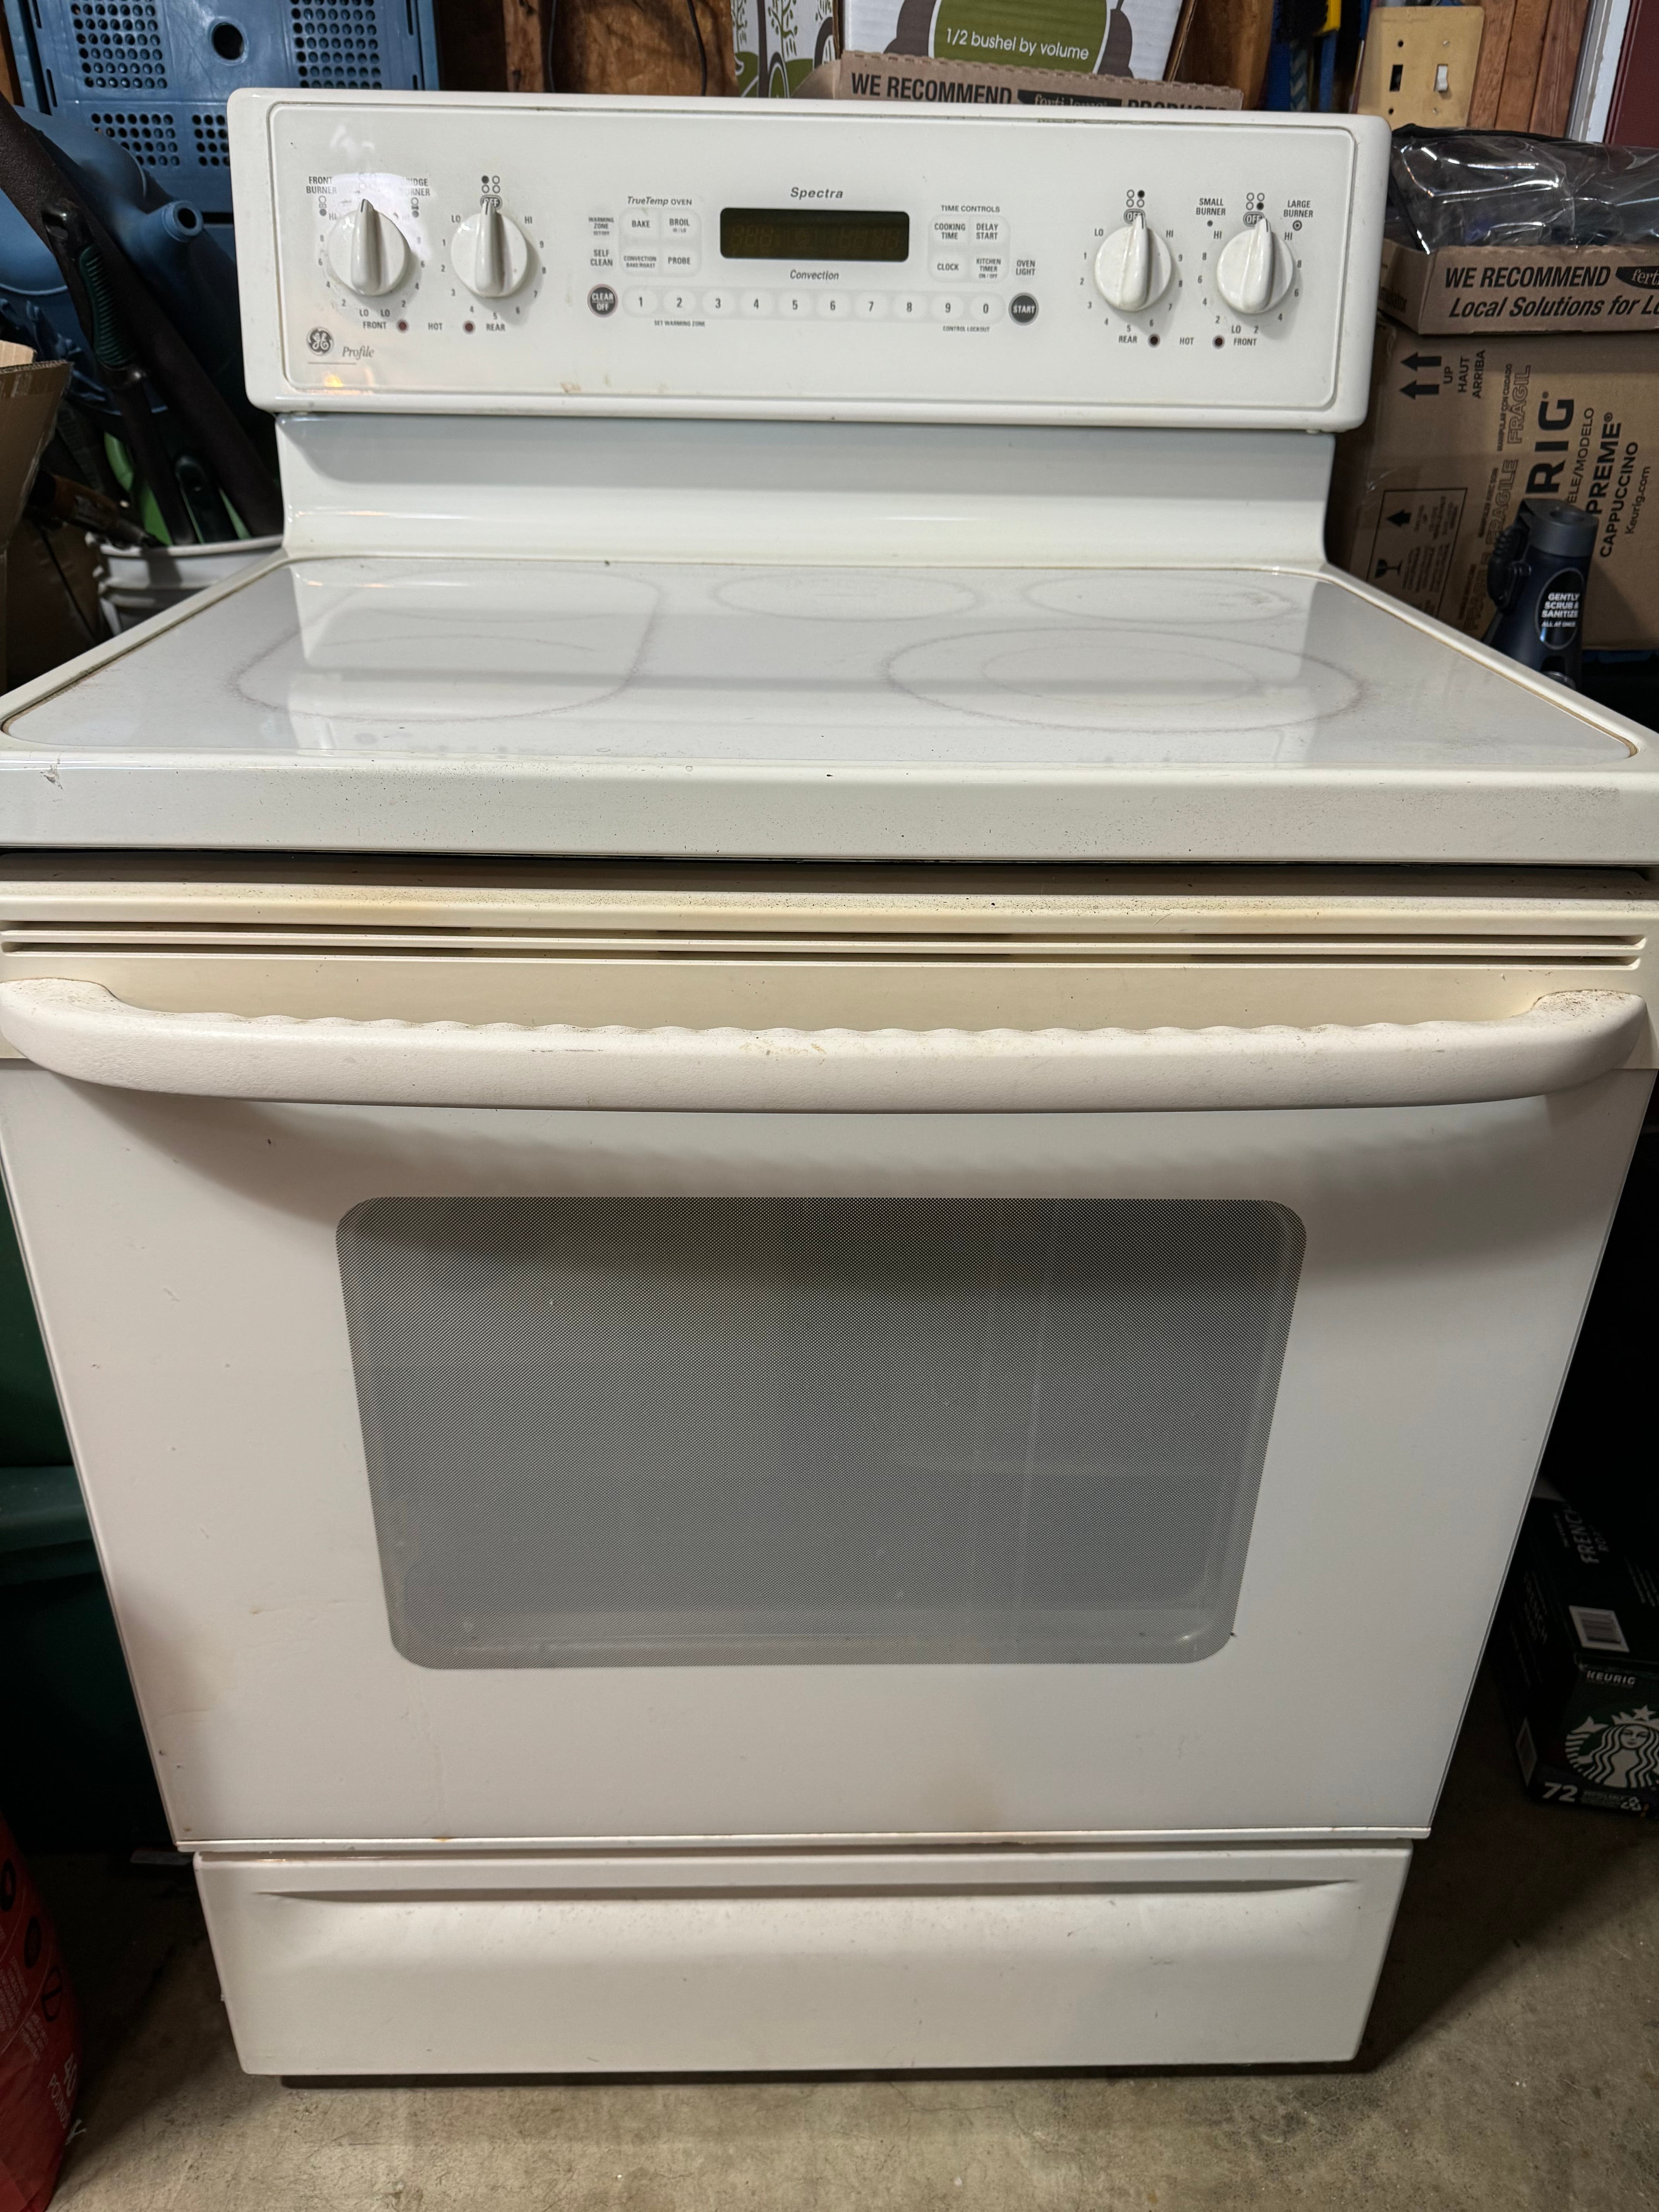 Free GE Profile convection oven & cook top. 